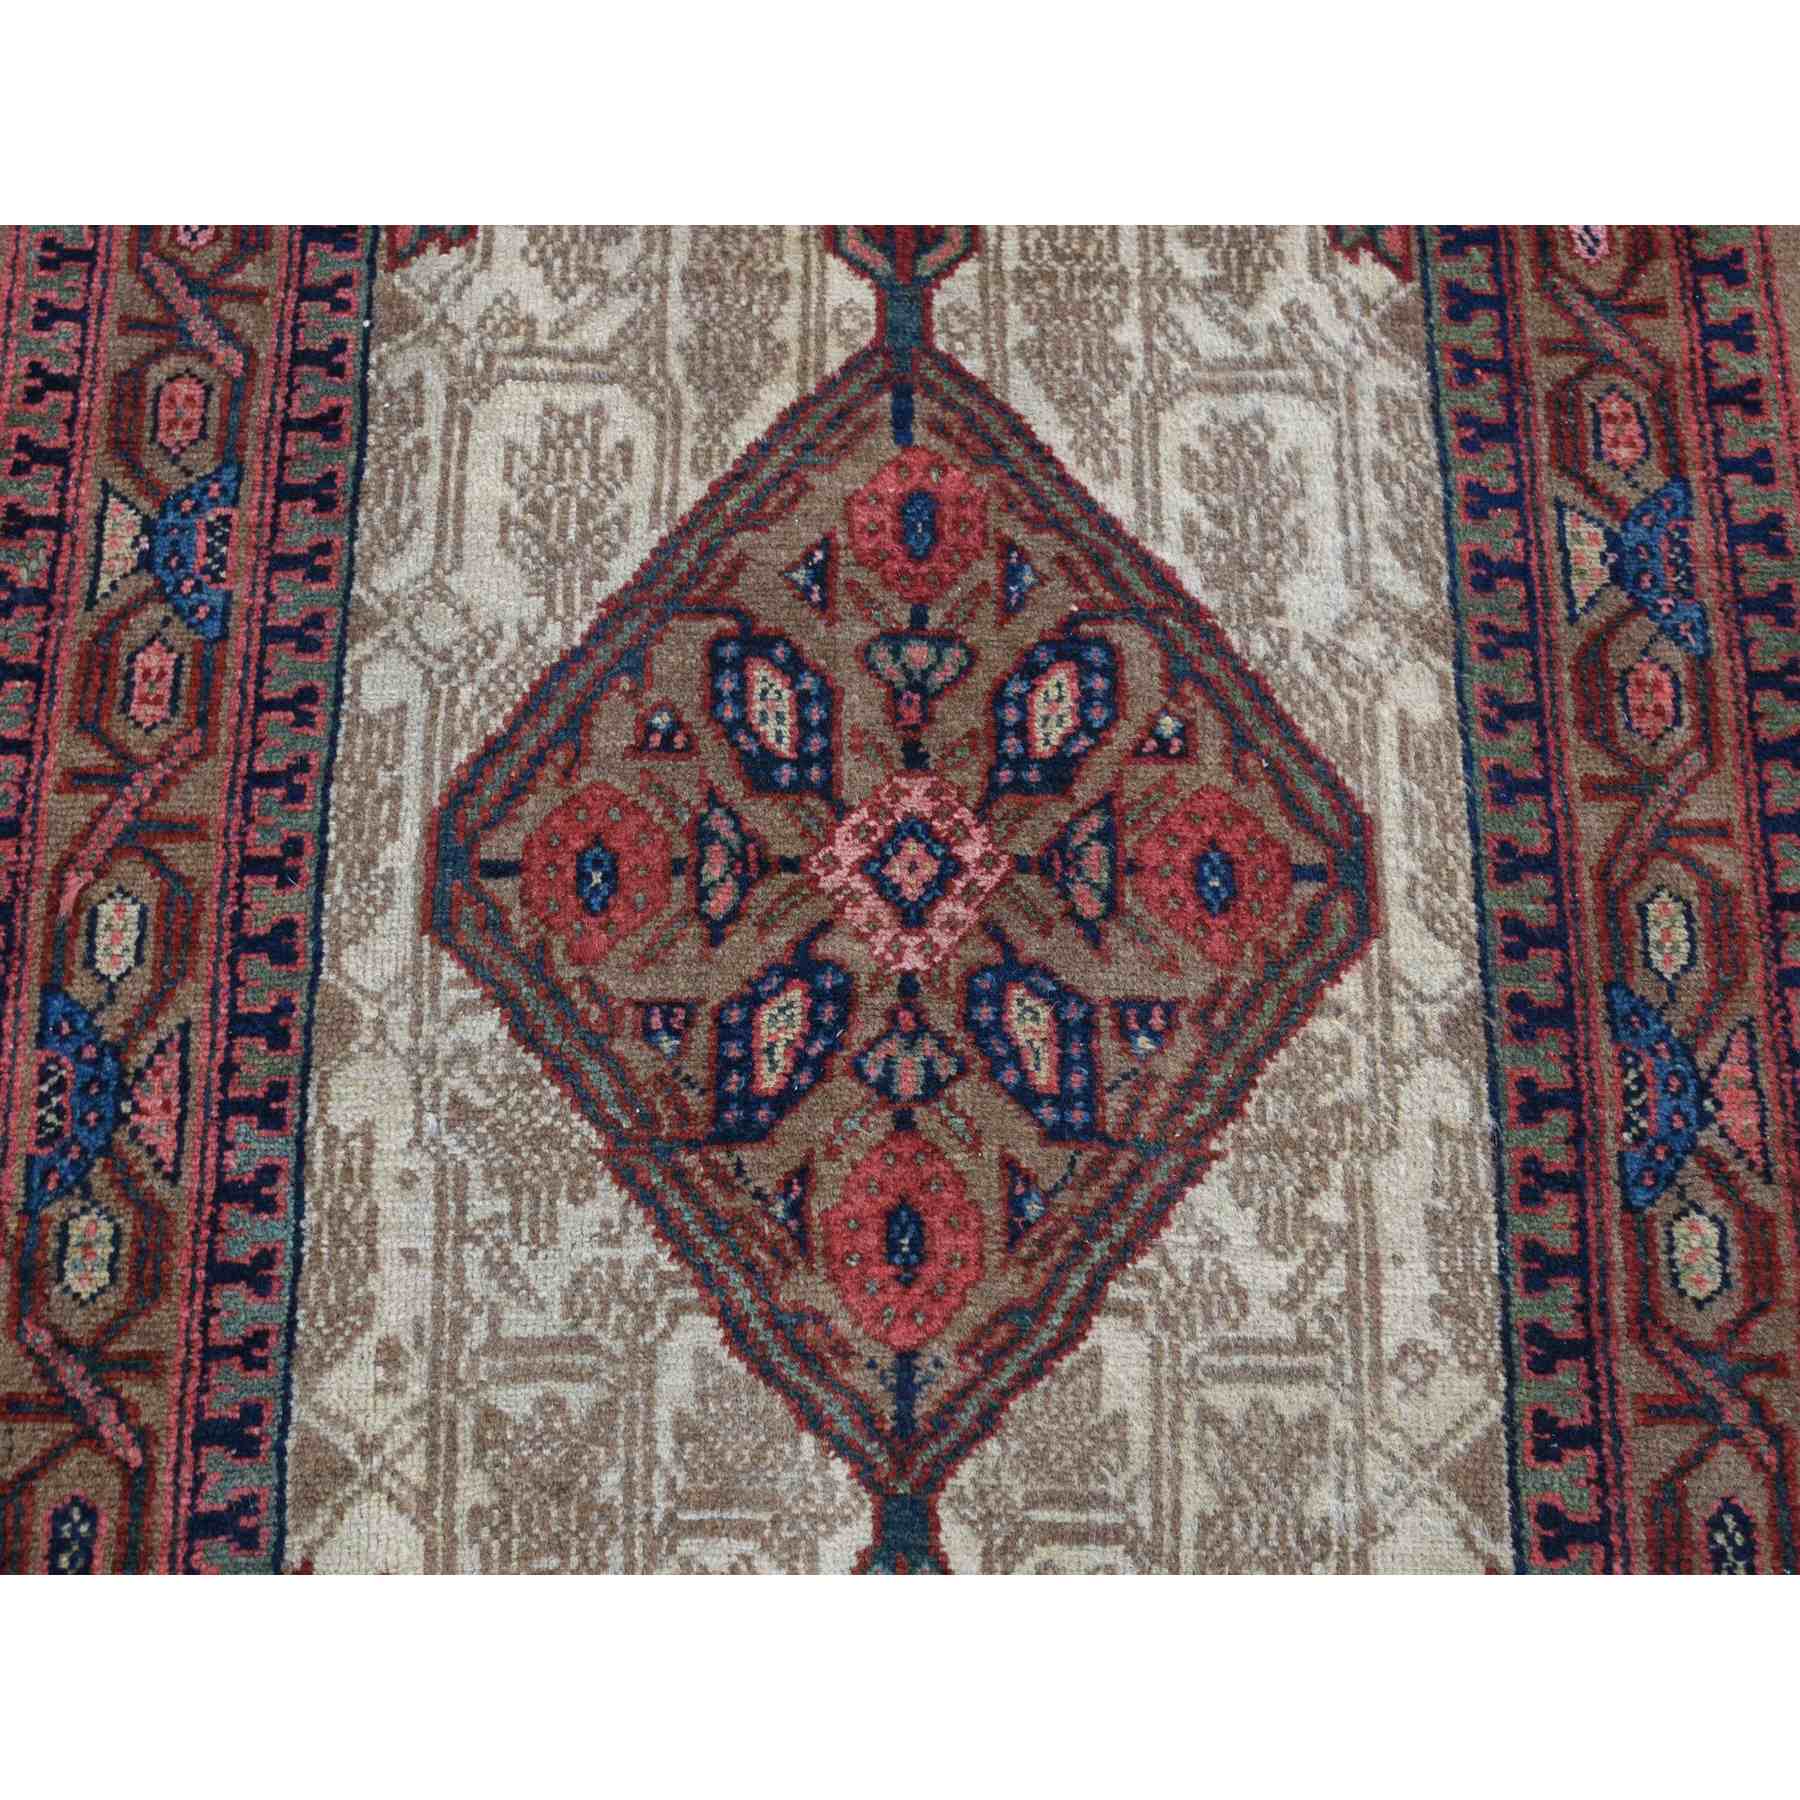 Antique-Hand-Knotted-Rug-403645